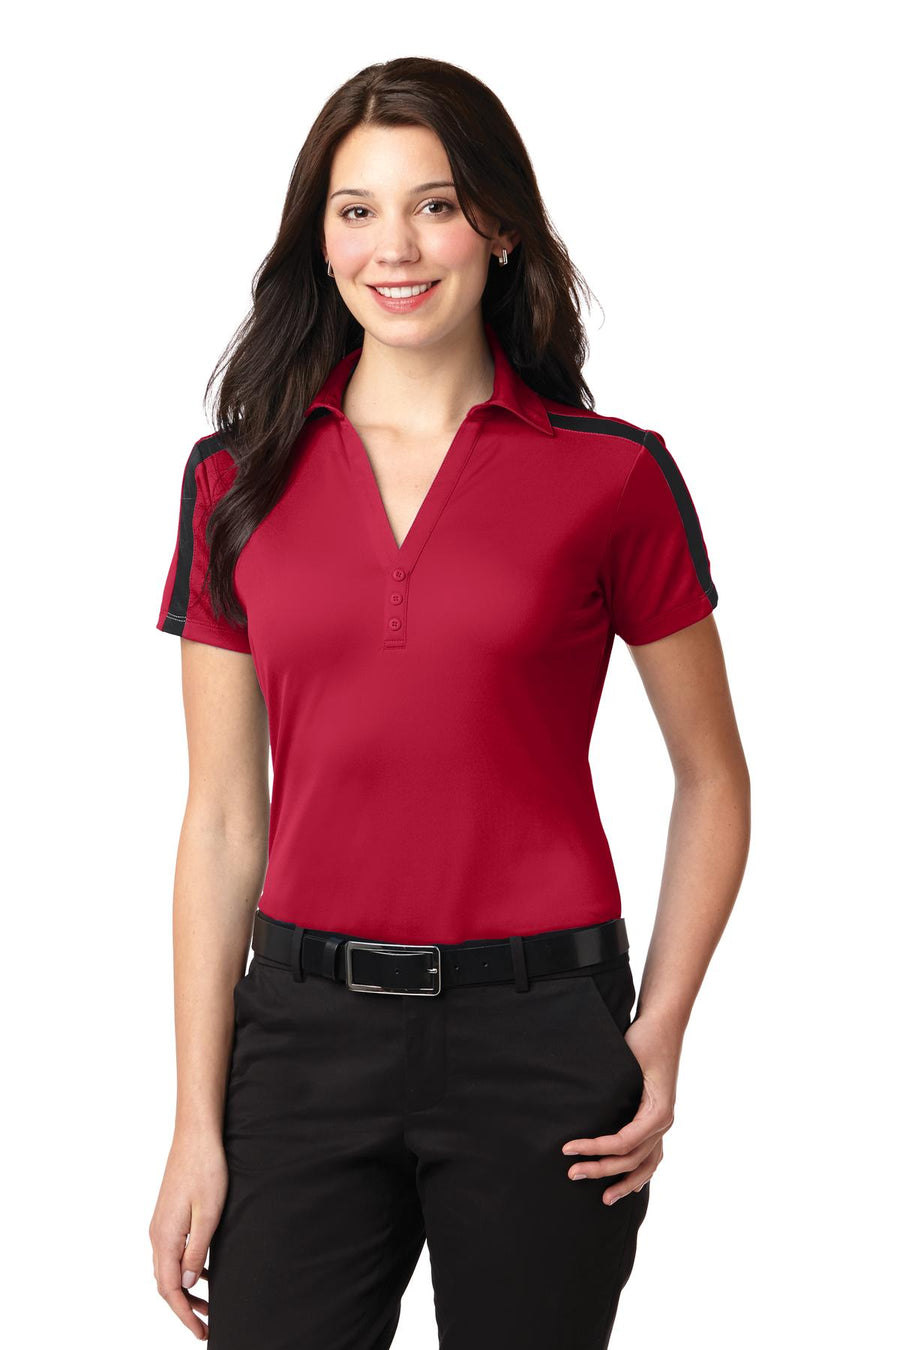 Port Authority Silk Touch Performance Colorblock Stripe Polo.